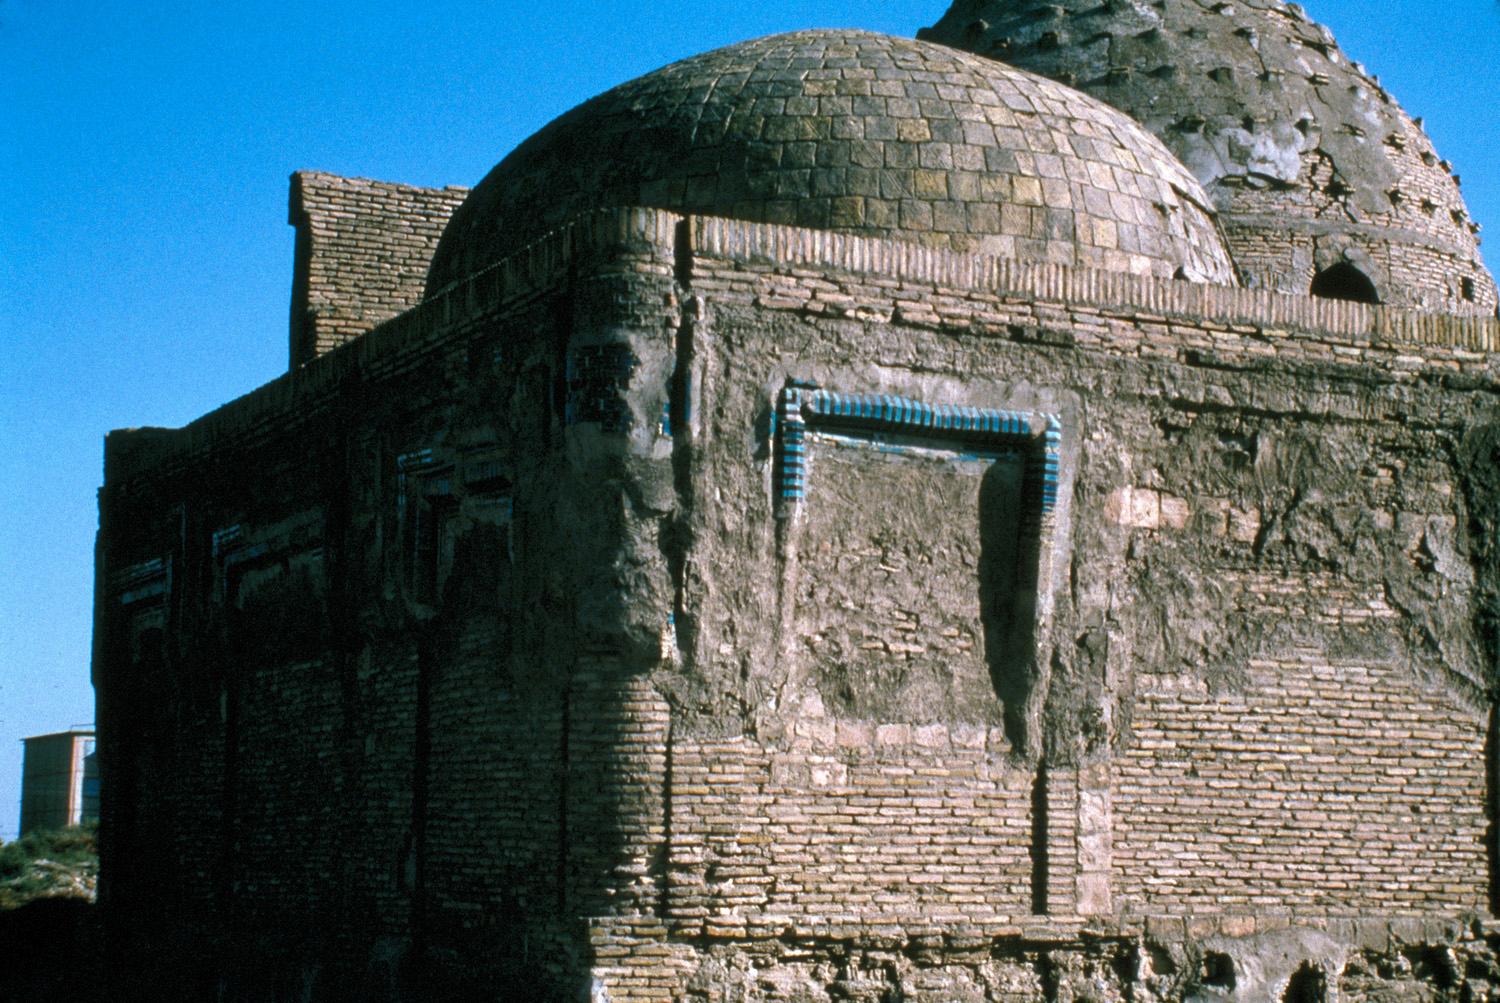 Exterior view from the northwest, with the intact dome of the Shrine of Sayf al-Din Bakharzi in the background